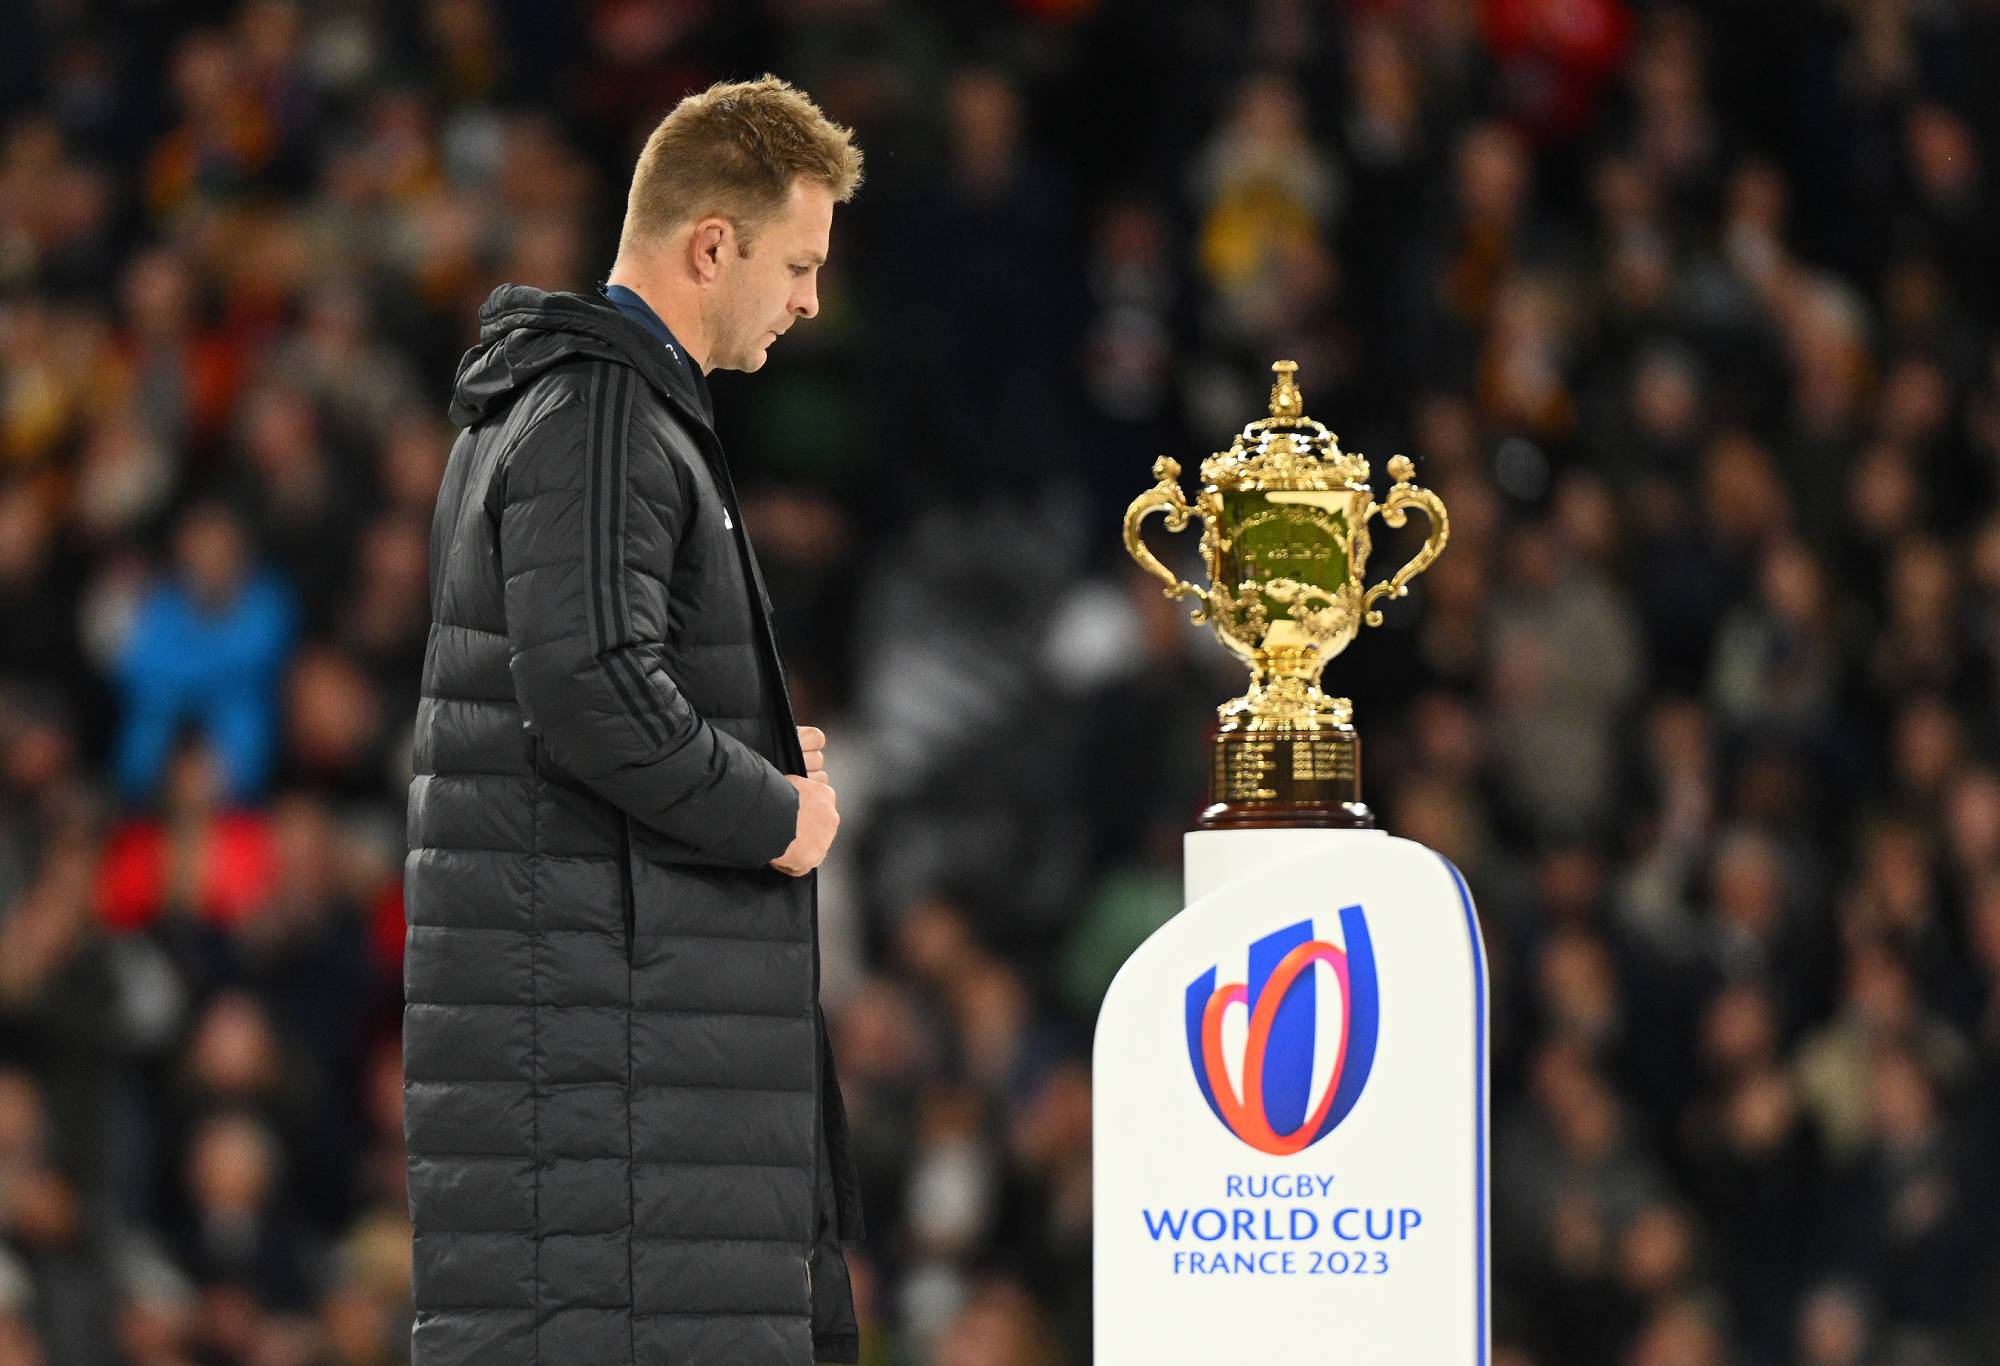 Sam Cane of New Zealand walks past the The Webb Ellis Cup following the Rugby World Cup Final match between New Zealand and South Africa at Stade de France on October 28, 2023 in Paris, France. (Photo by David Ramos - World Rugby/World Rugby via Getty Images)